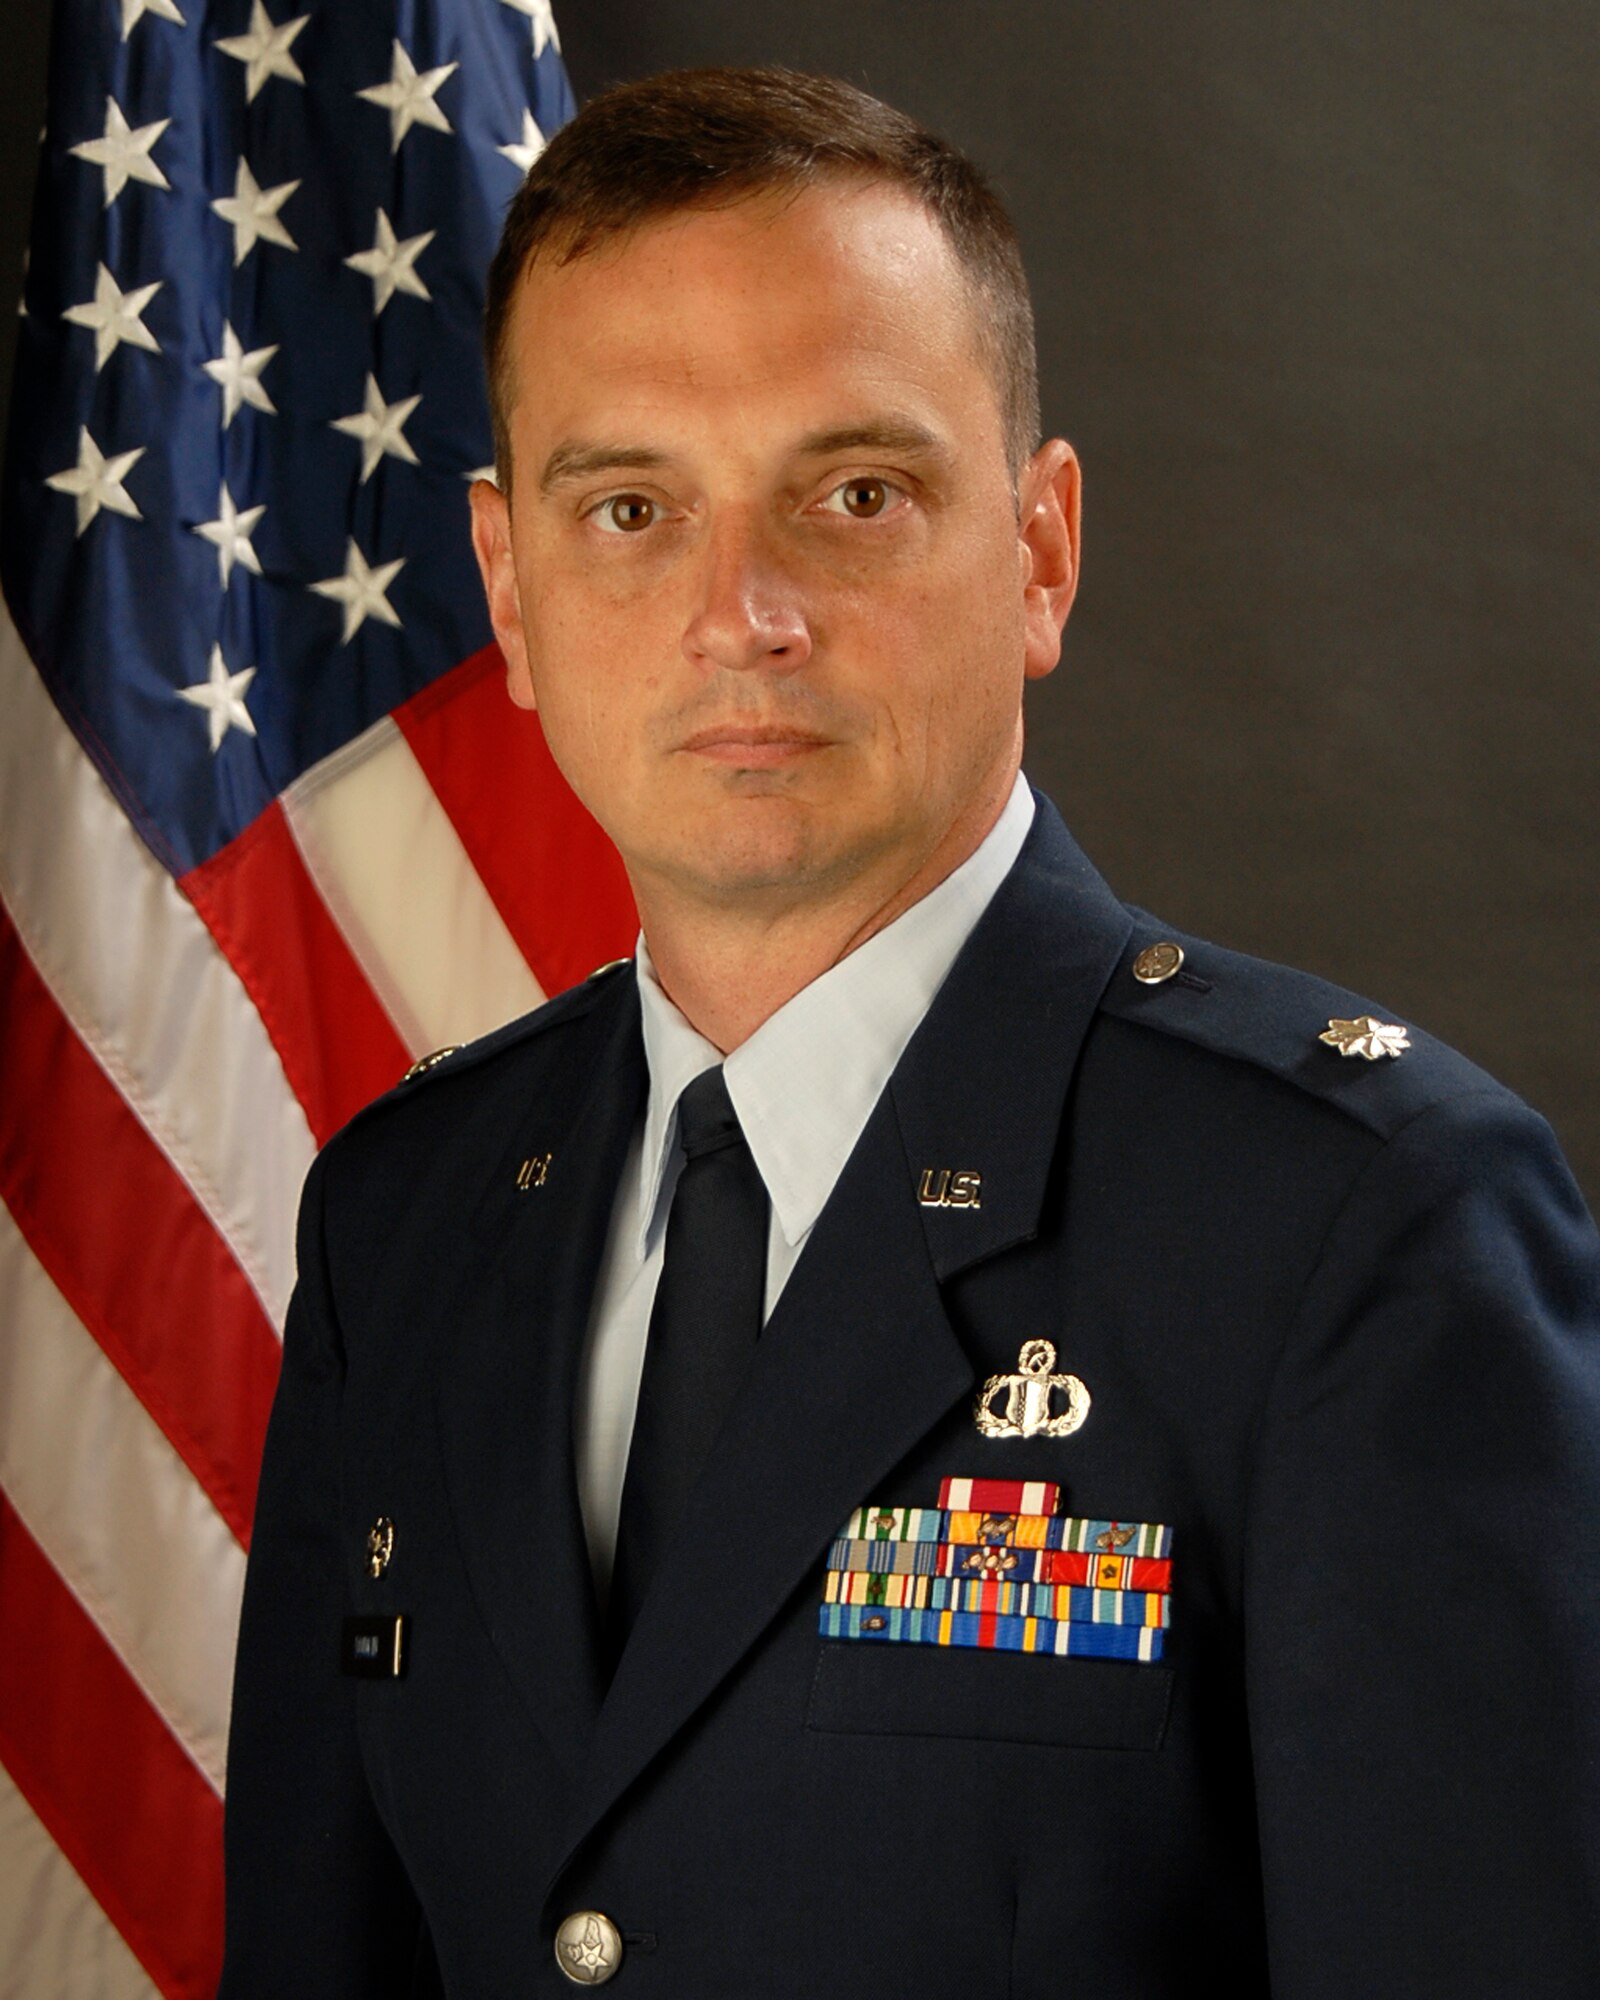 Lt. Col. Michael Dunkin, 245th ATCS Commander, poses for his photo on 9 Sept, 2011.
(SCANG photo by Tech. Sgt Caycee Cook)